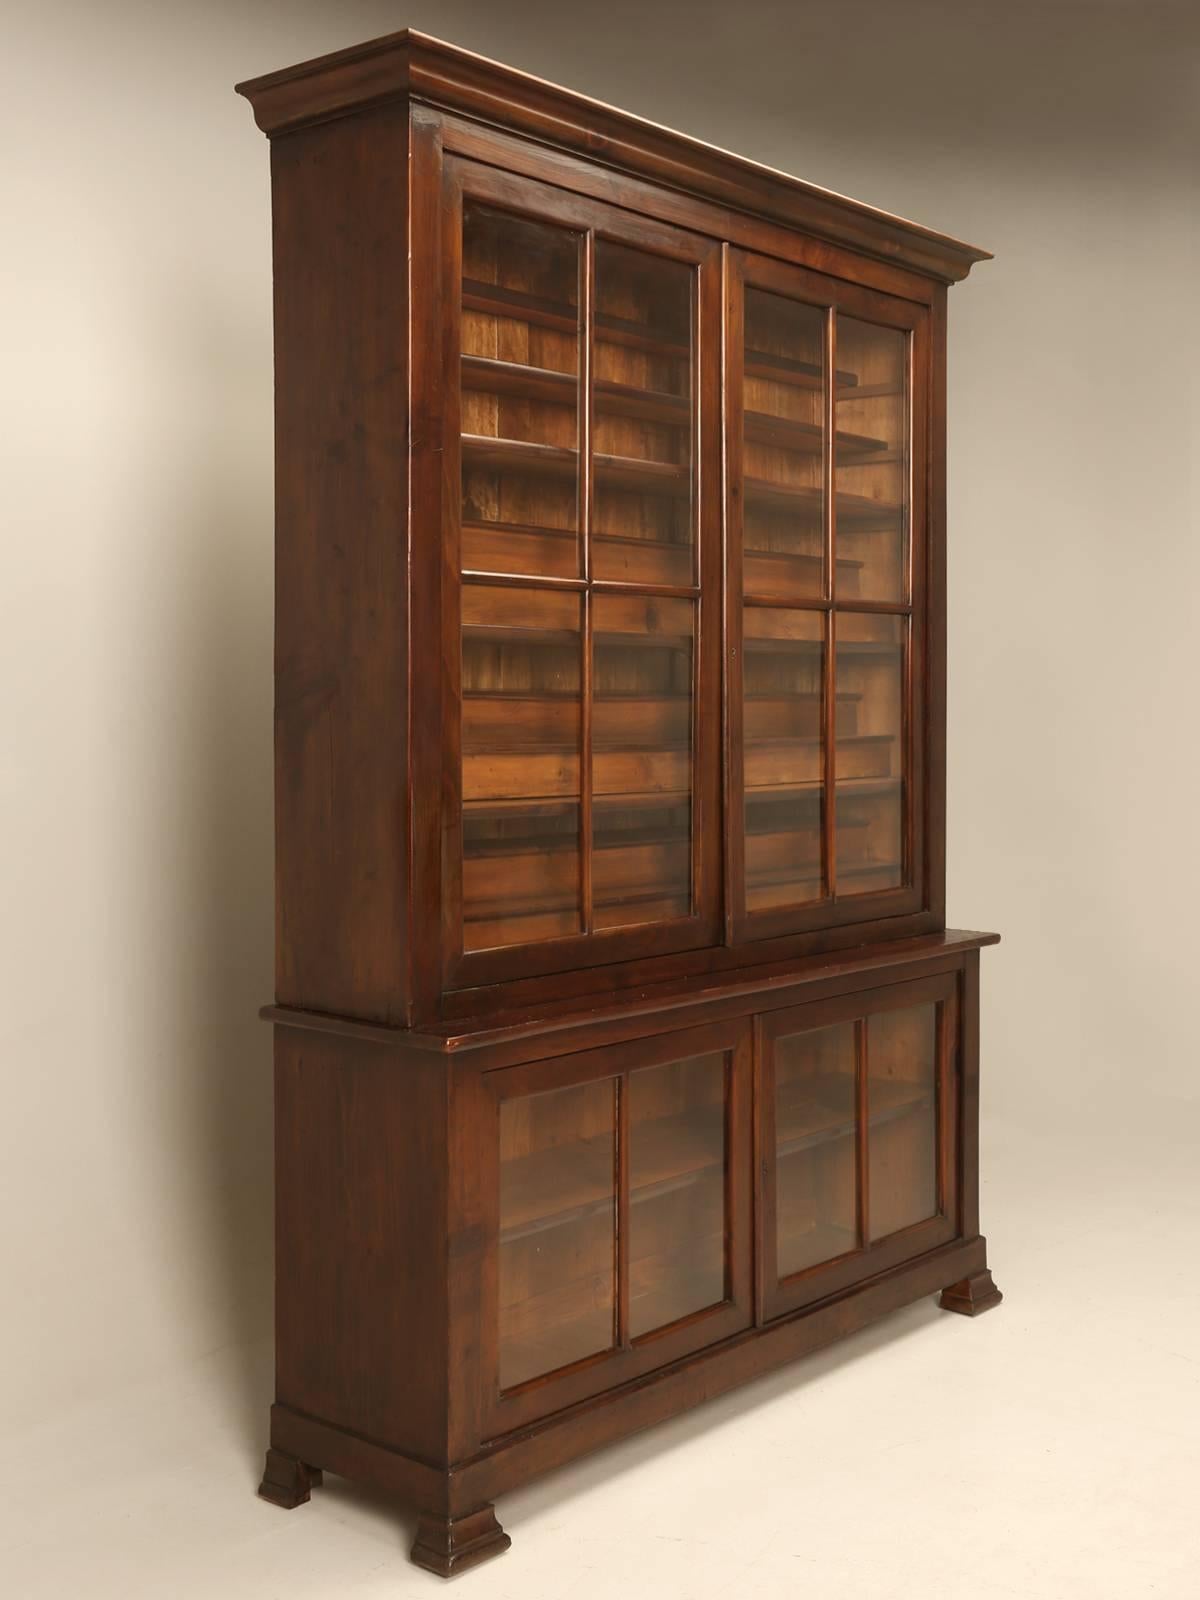 Antique French Bookcase or French China Cabinet that started out life in The Village of Varennes-sur-Allier that was the home of a Monastery built in 1891 named; Maison des Freres Maristes. In one of the classrooms stood a pair of immense Cabinets,